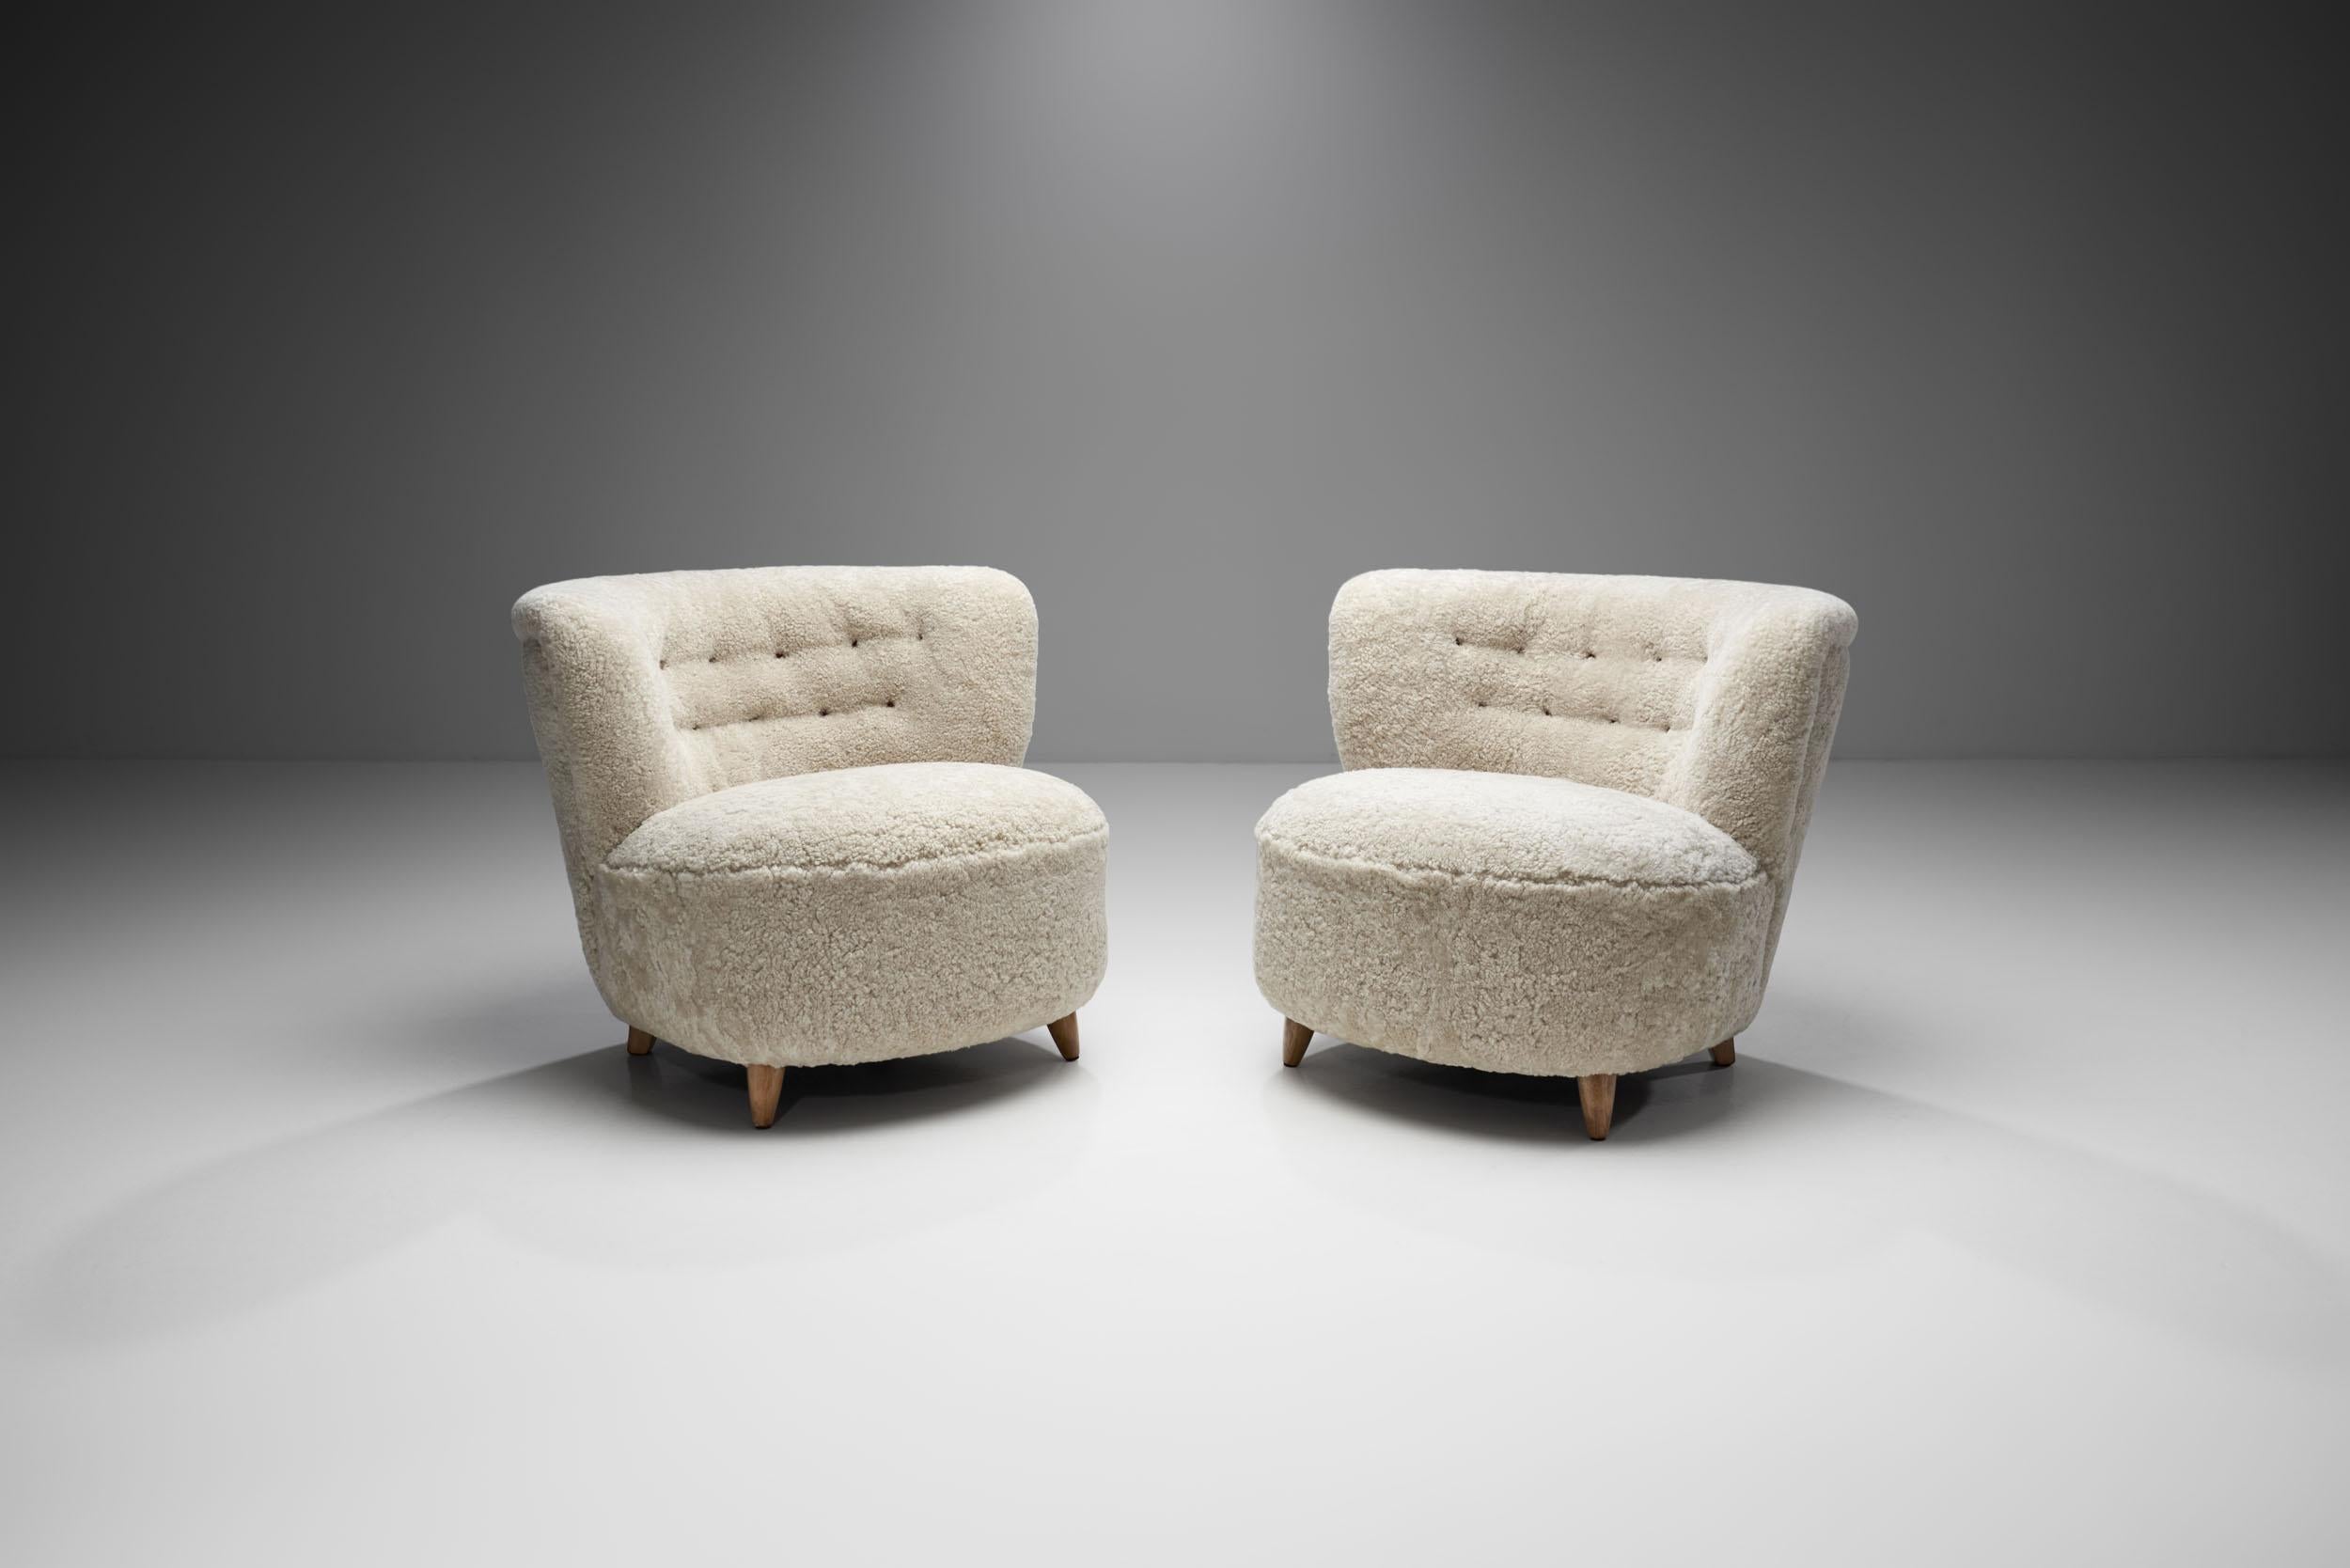 “Danish Modern” is a recognized term around the world, standing for the characteristic style of Danish design created during the 20th century. As these lounge chairs show, furniture created in this period are characterized by clarity in design, and